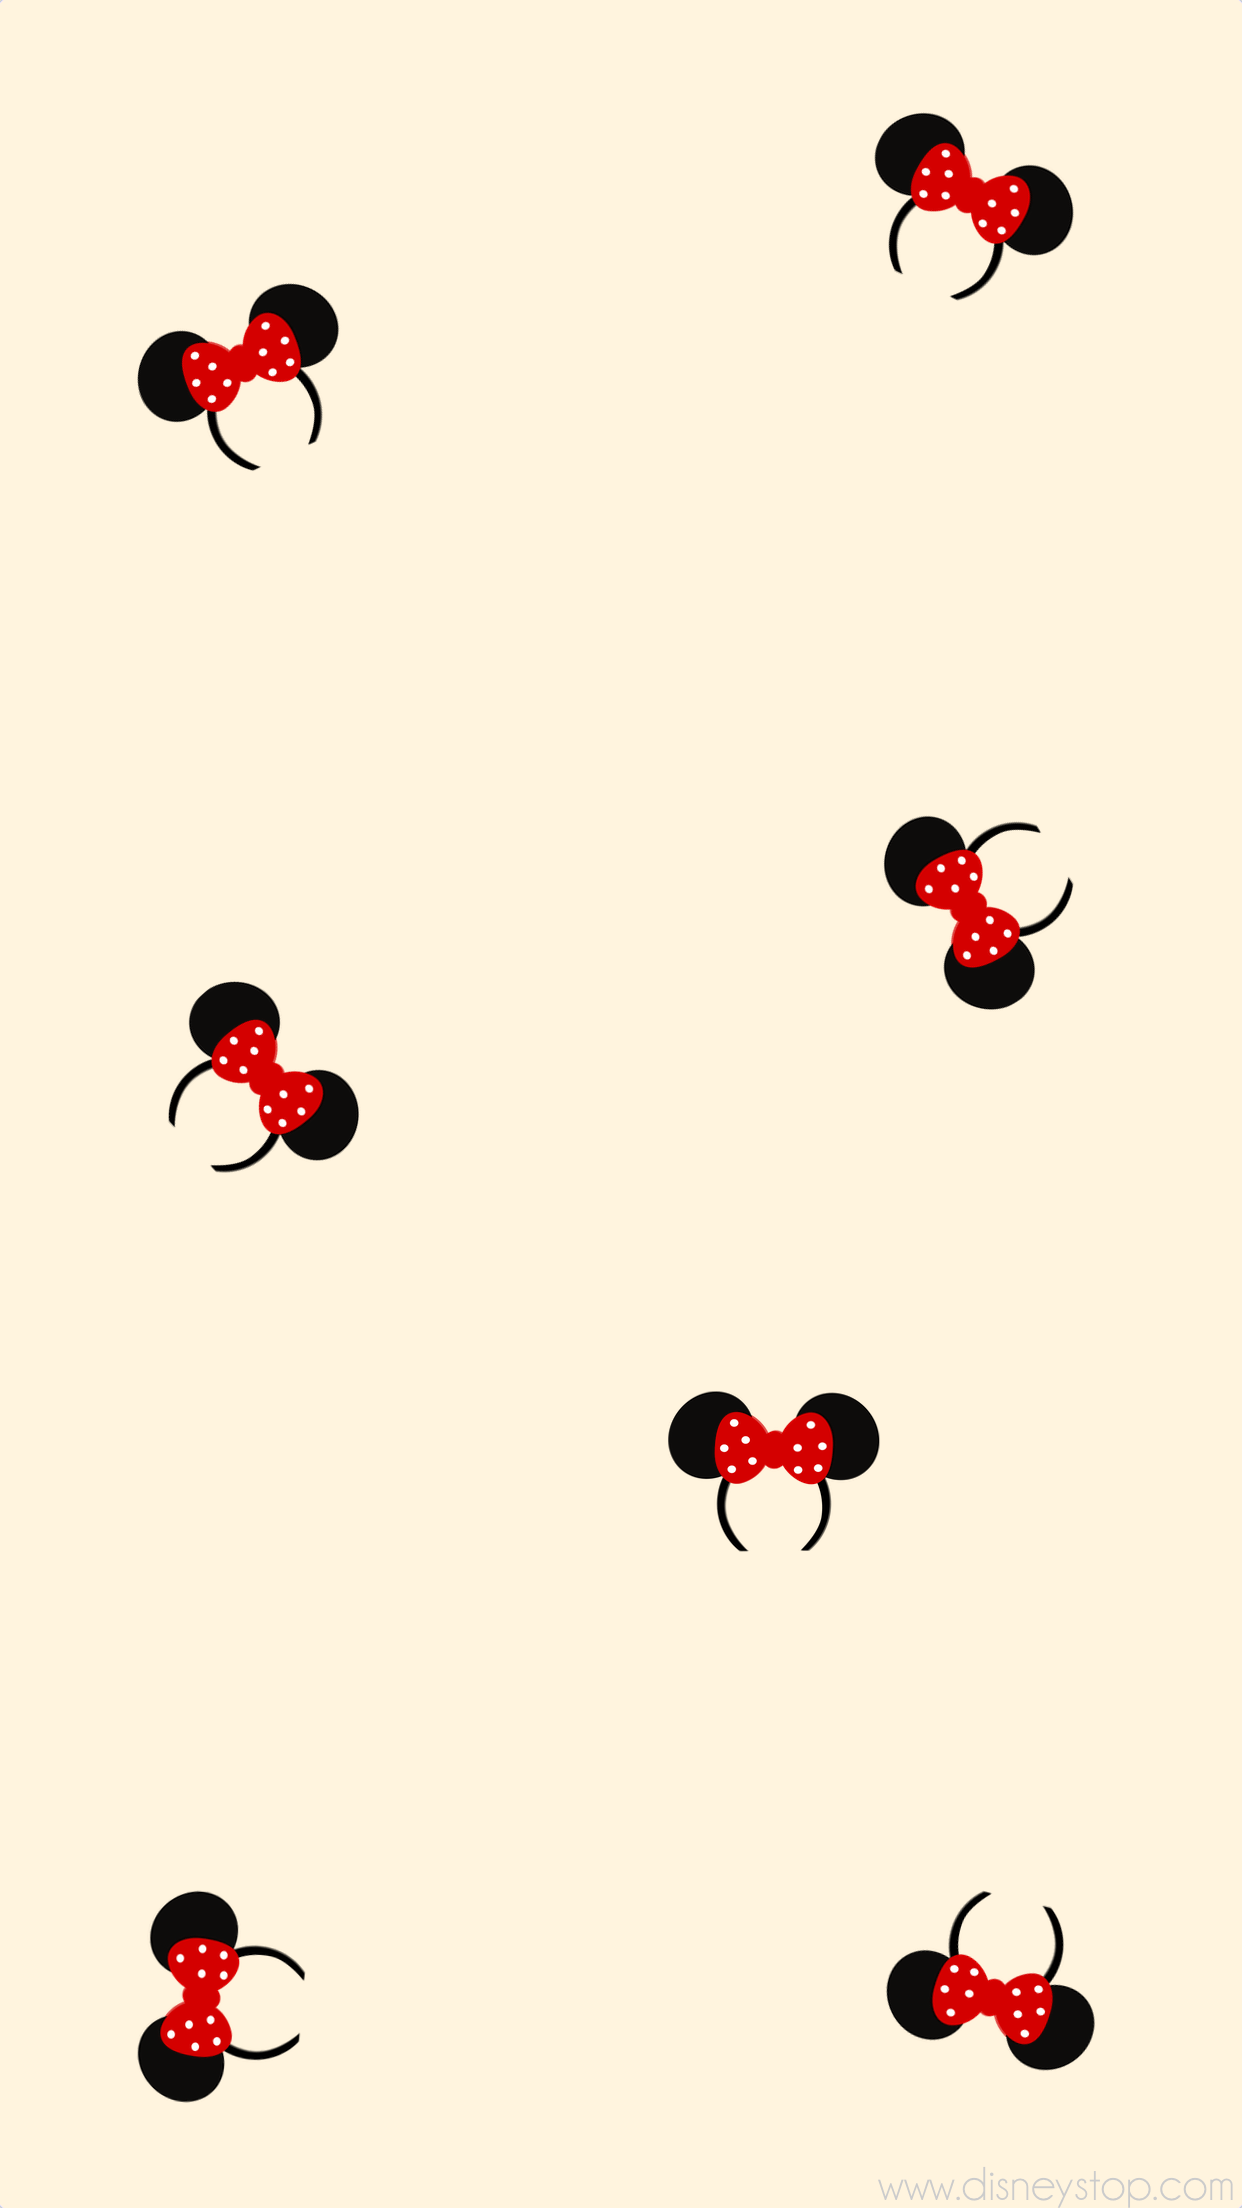 A wallpaper with Minnie Mouse ears - Minnie Mouse